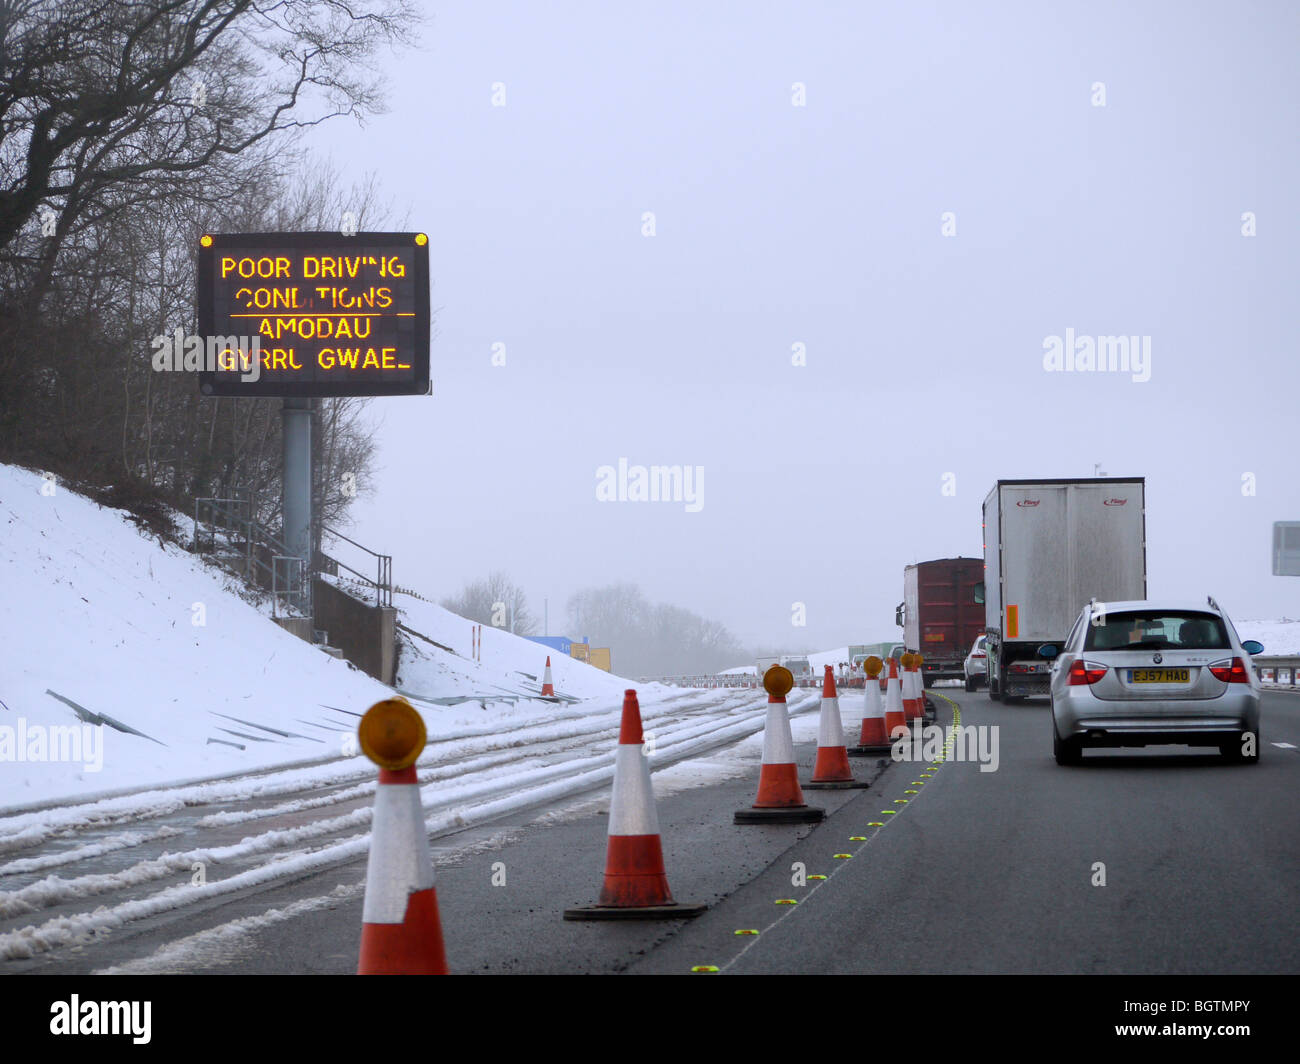 Poor motorway driving conditions during winter on the M4 west bound with fog and snow Stock Photo